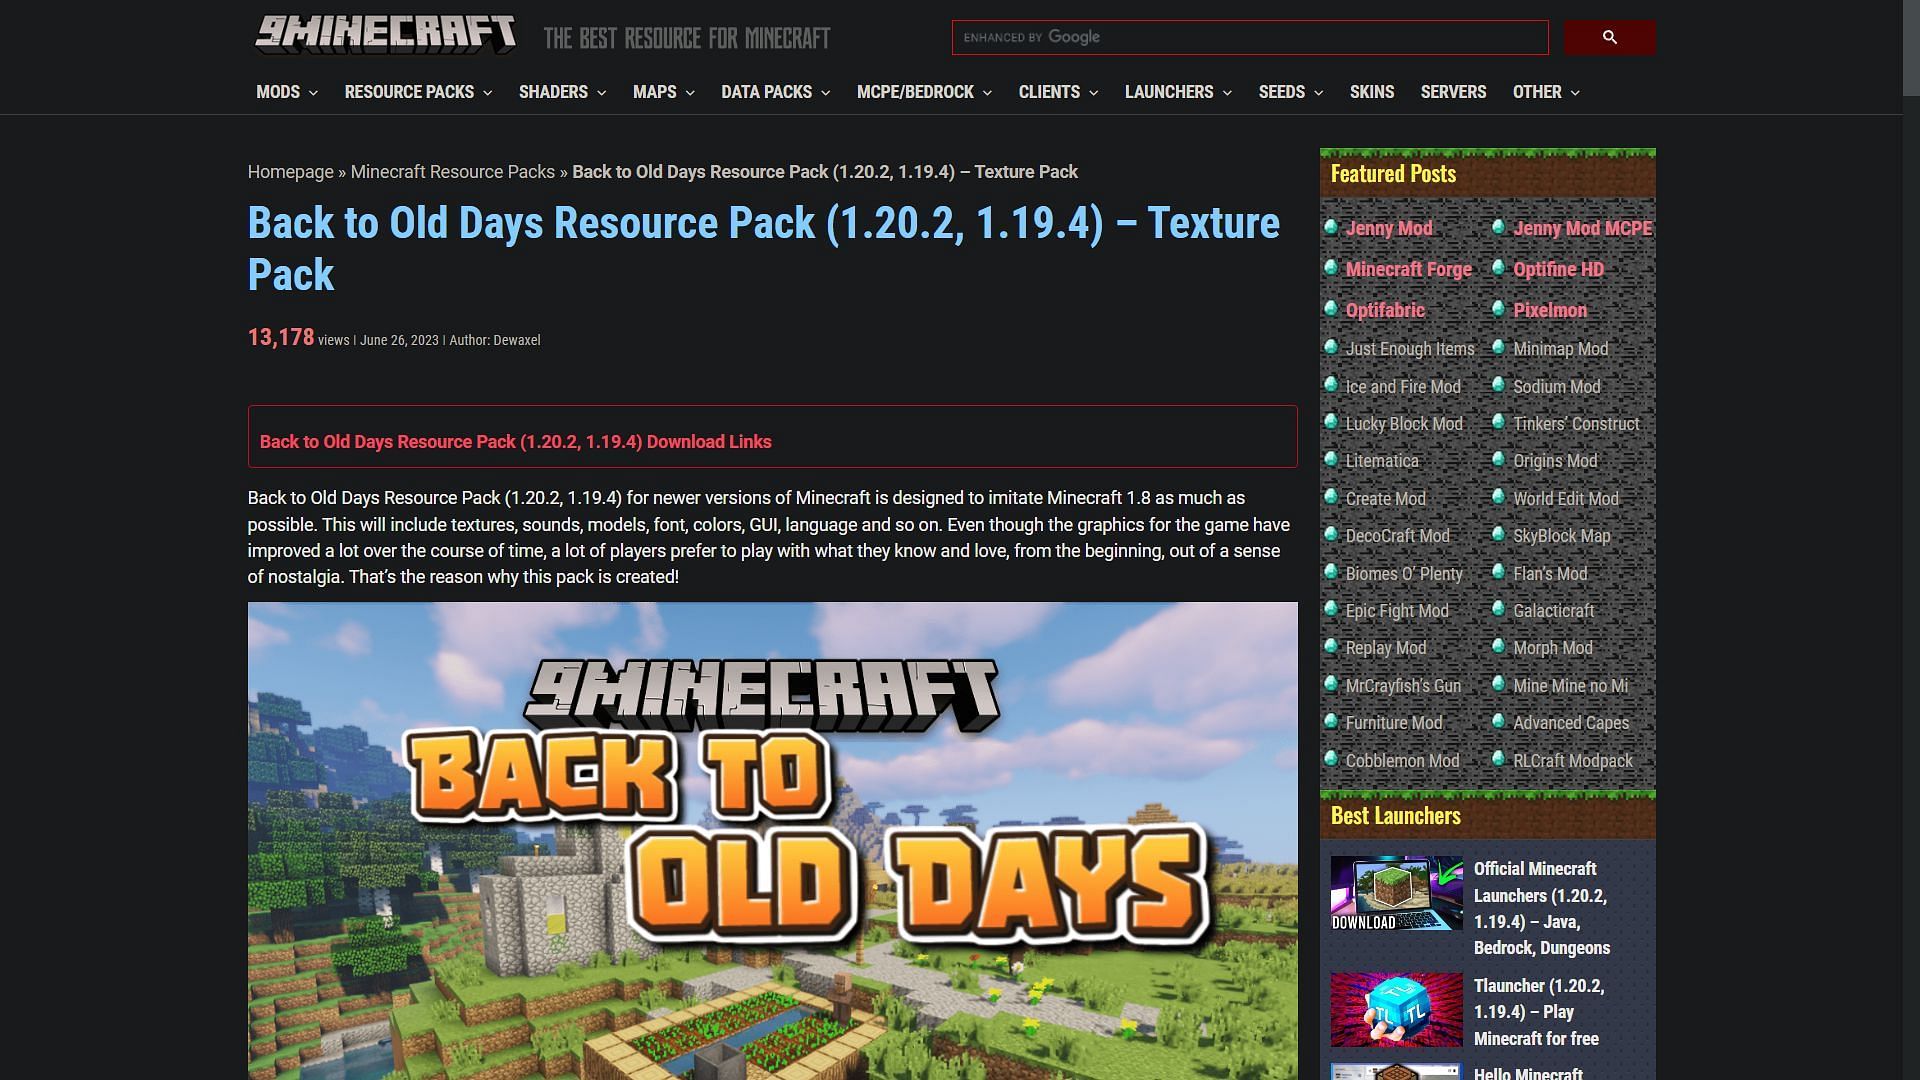 Back to Old Days Resource Pack adds old Minecraft textures from the 1.8 version (Image via Sportskeeda)